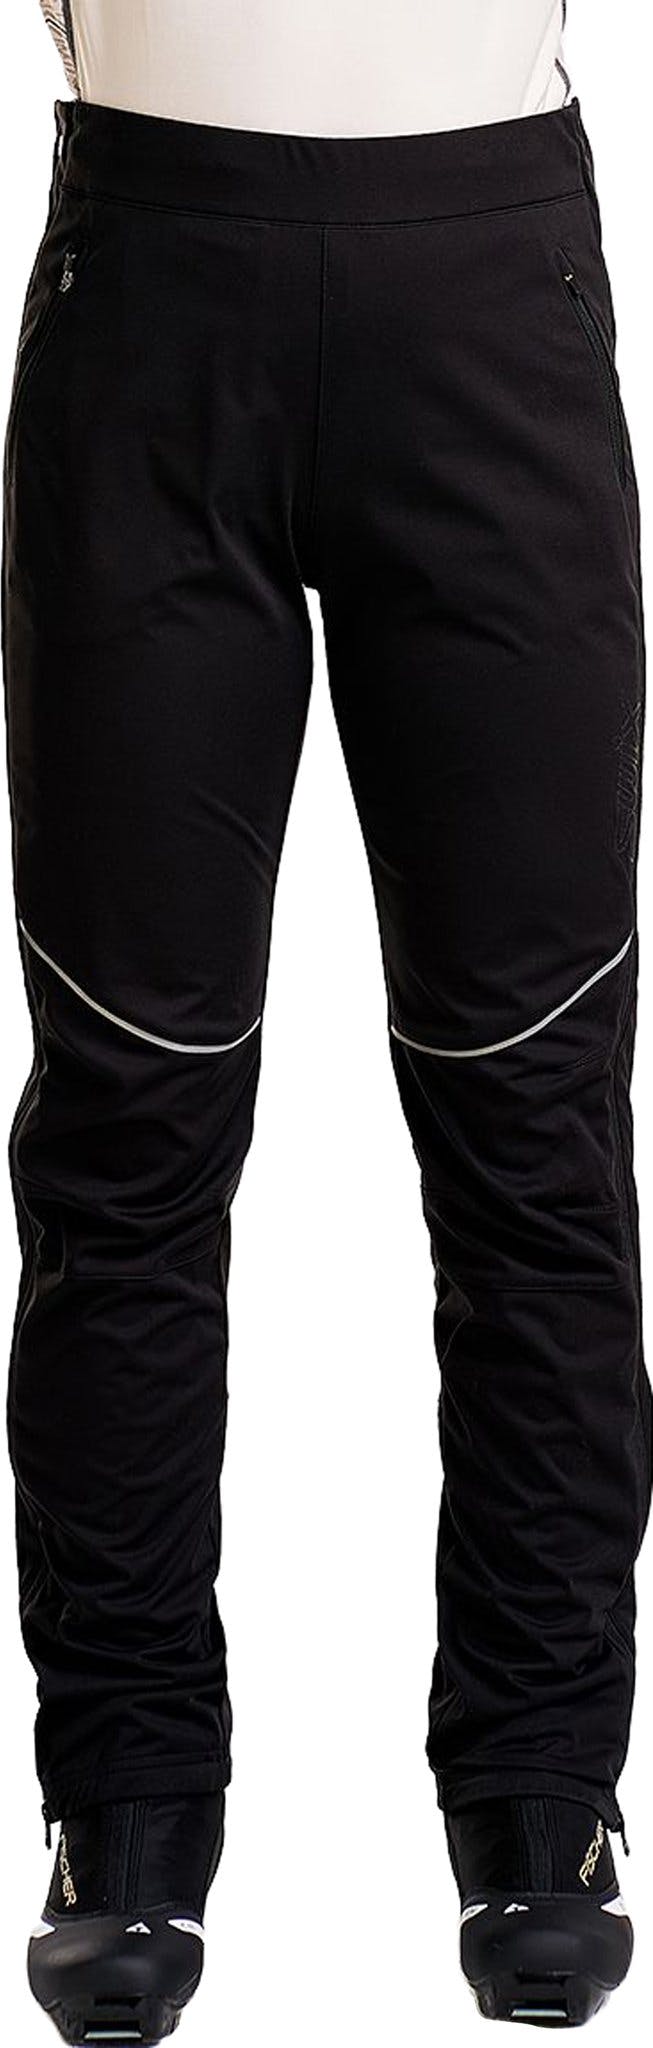 Product image for Solo Full Zip Pants - Women's